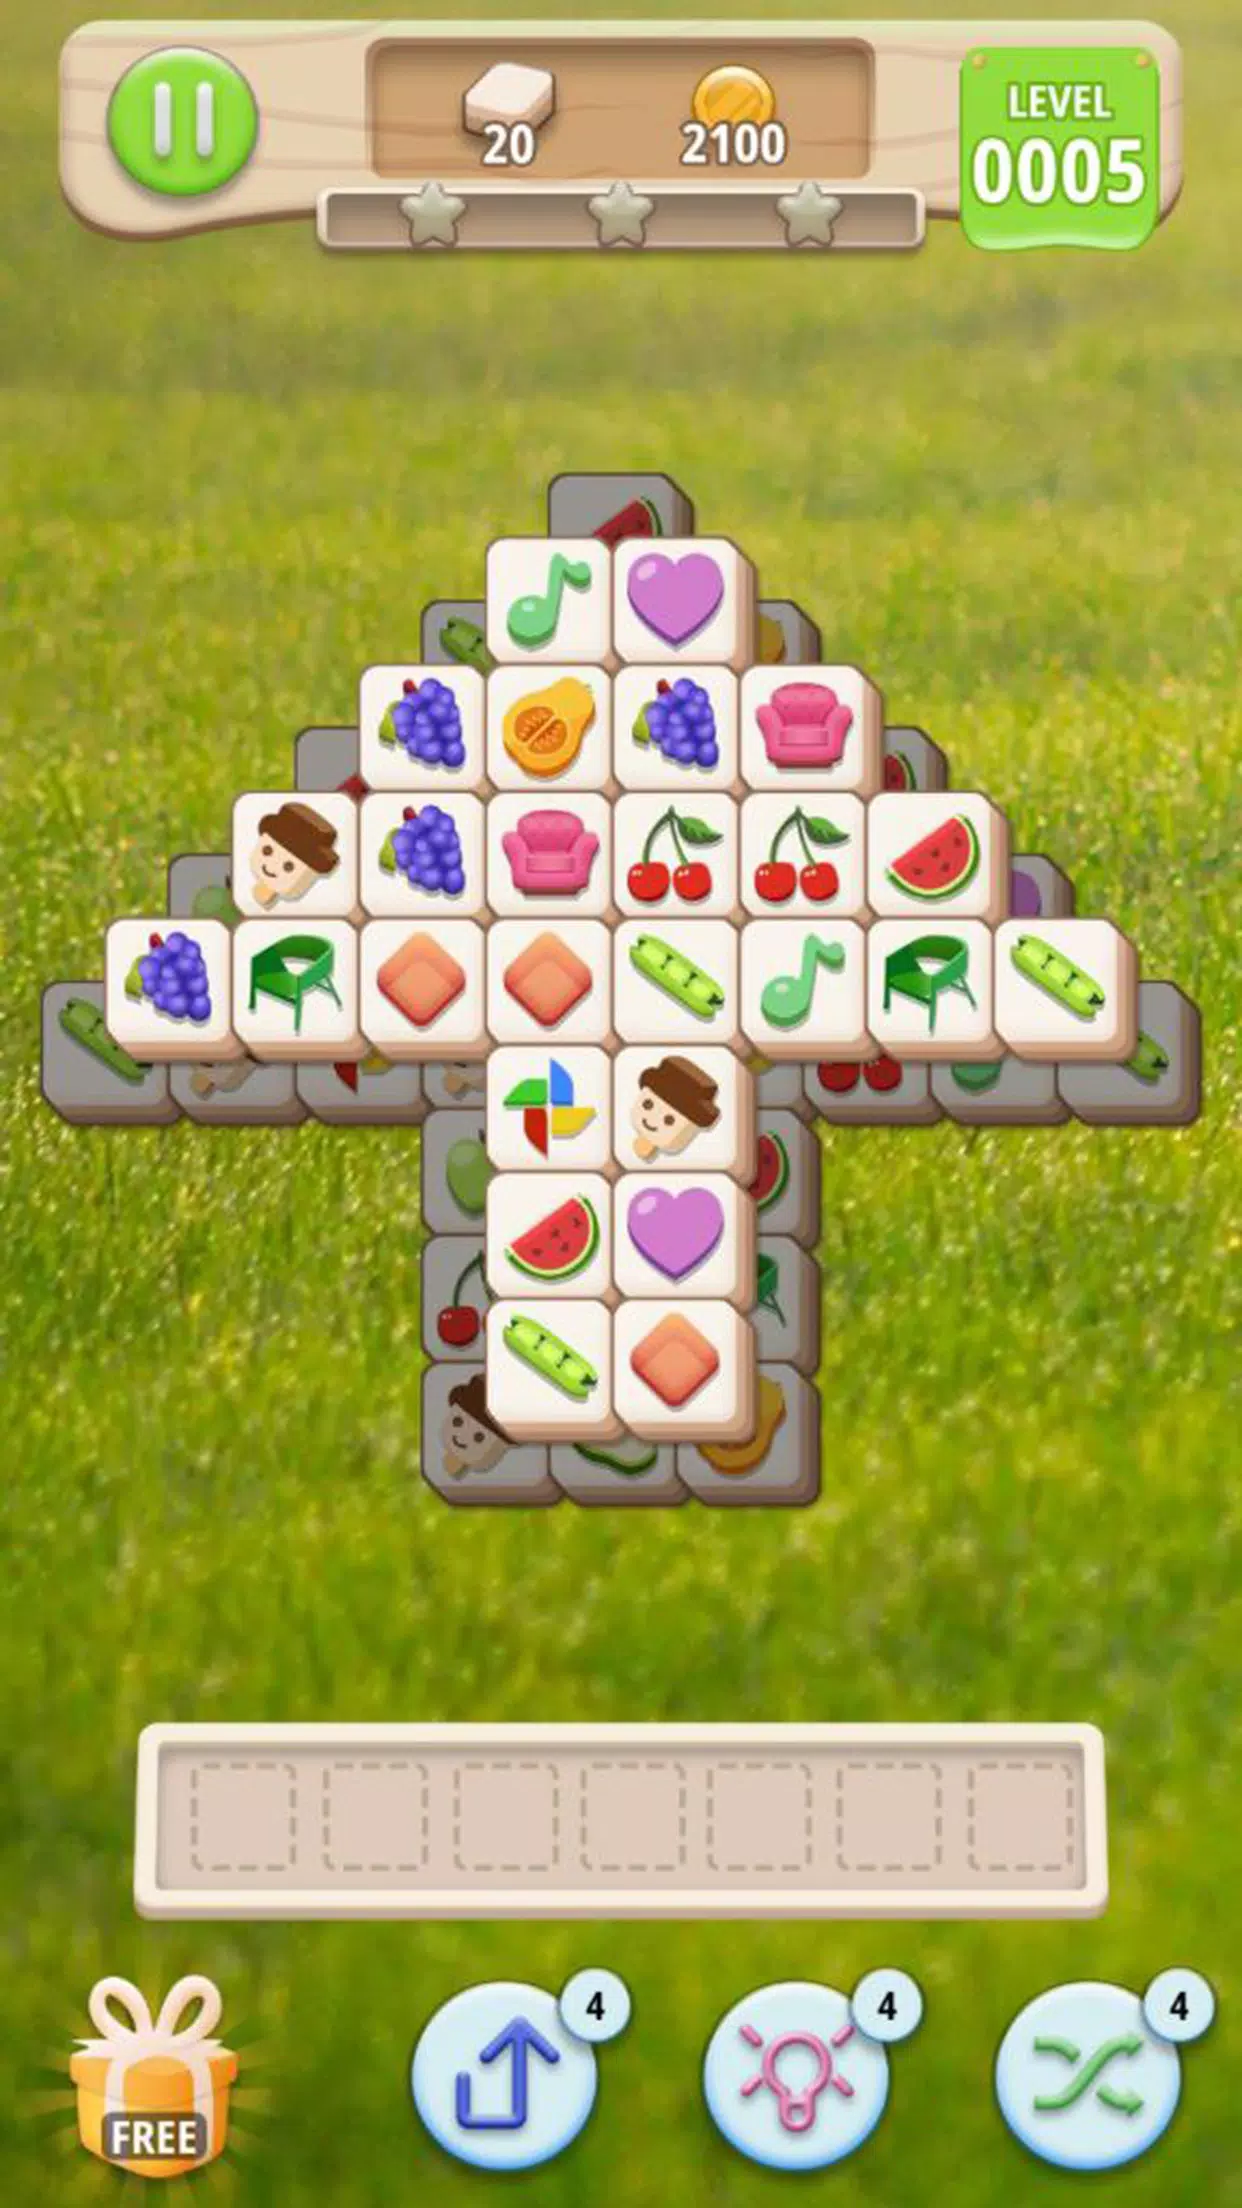 Tile Club - Matching Game for Android - Free App Download